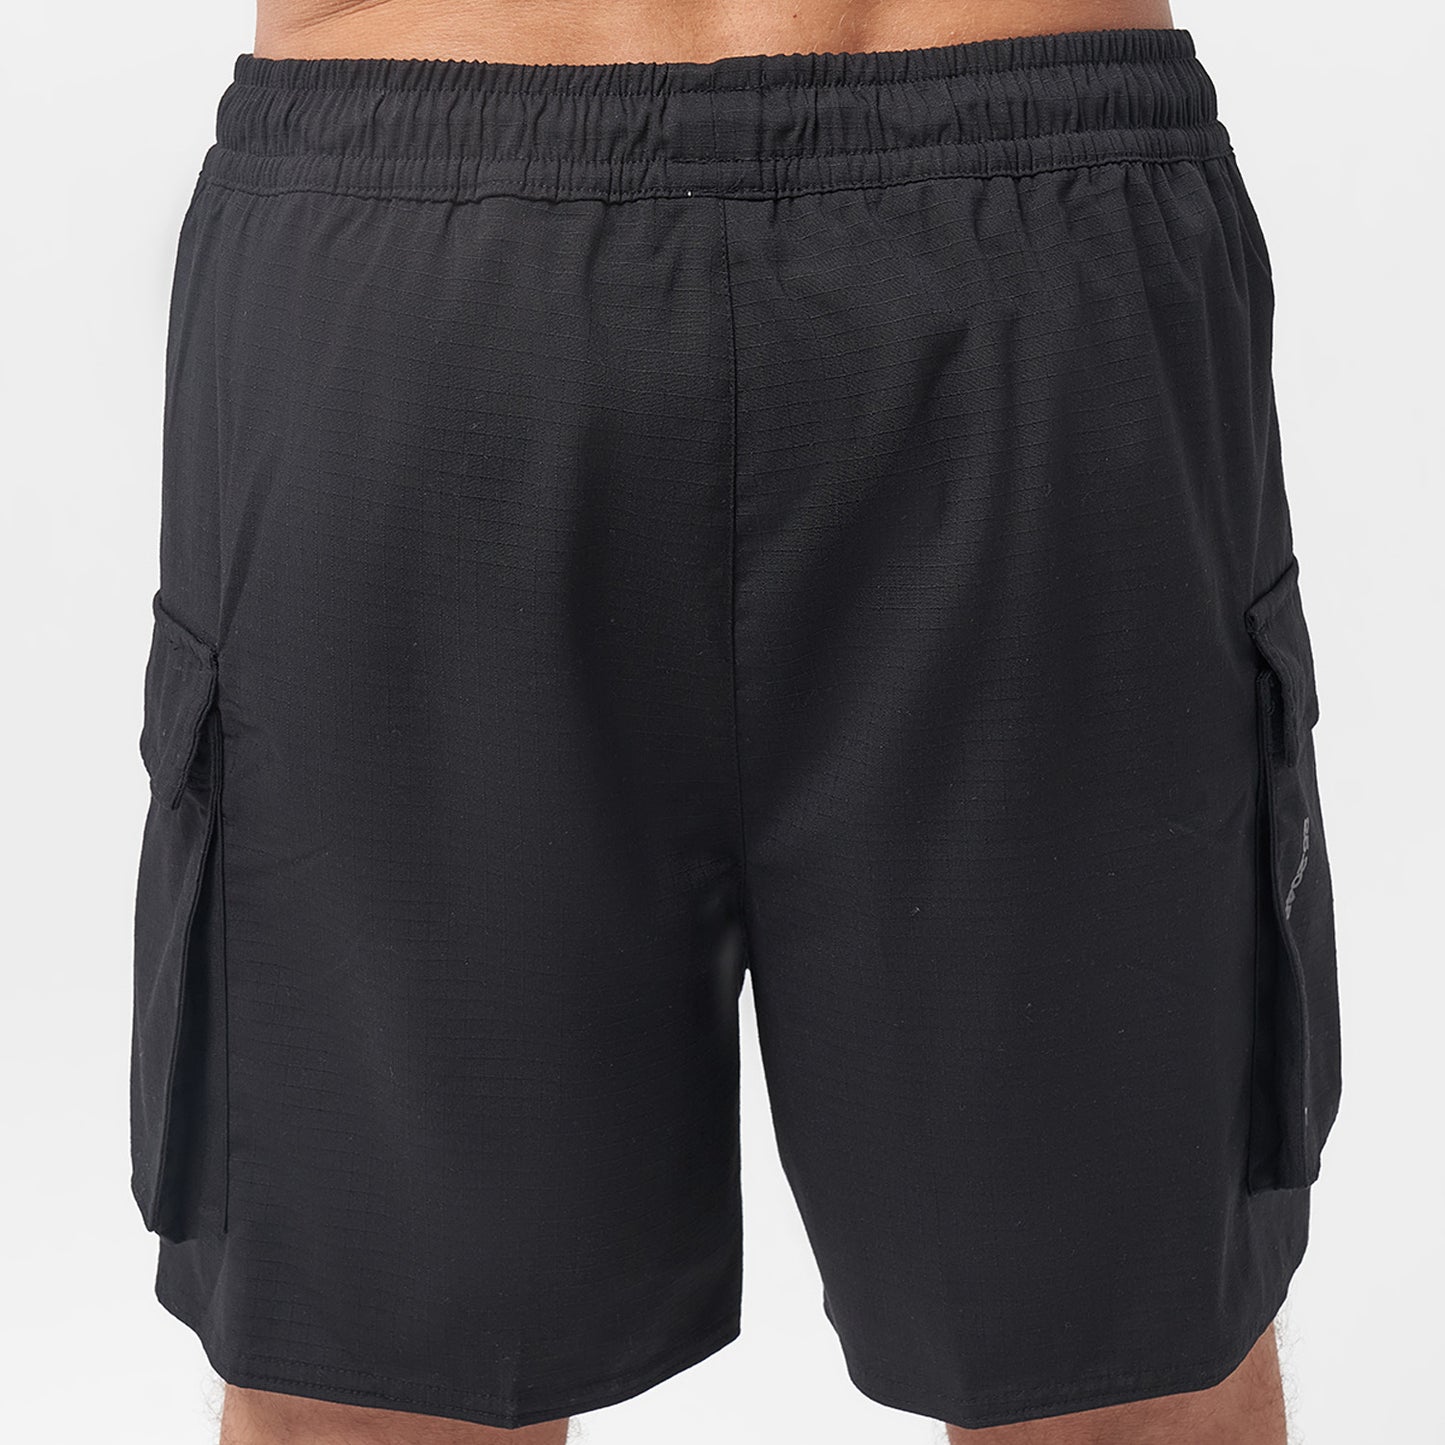 squatwolf-gym-wear-code-2-in-1-cargo-shorts-black-workout-shorts-for-men